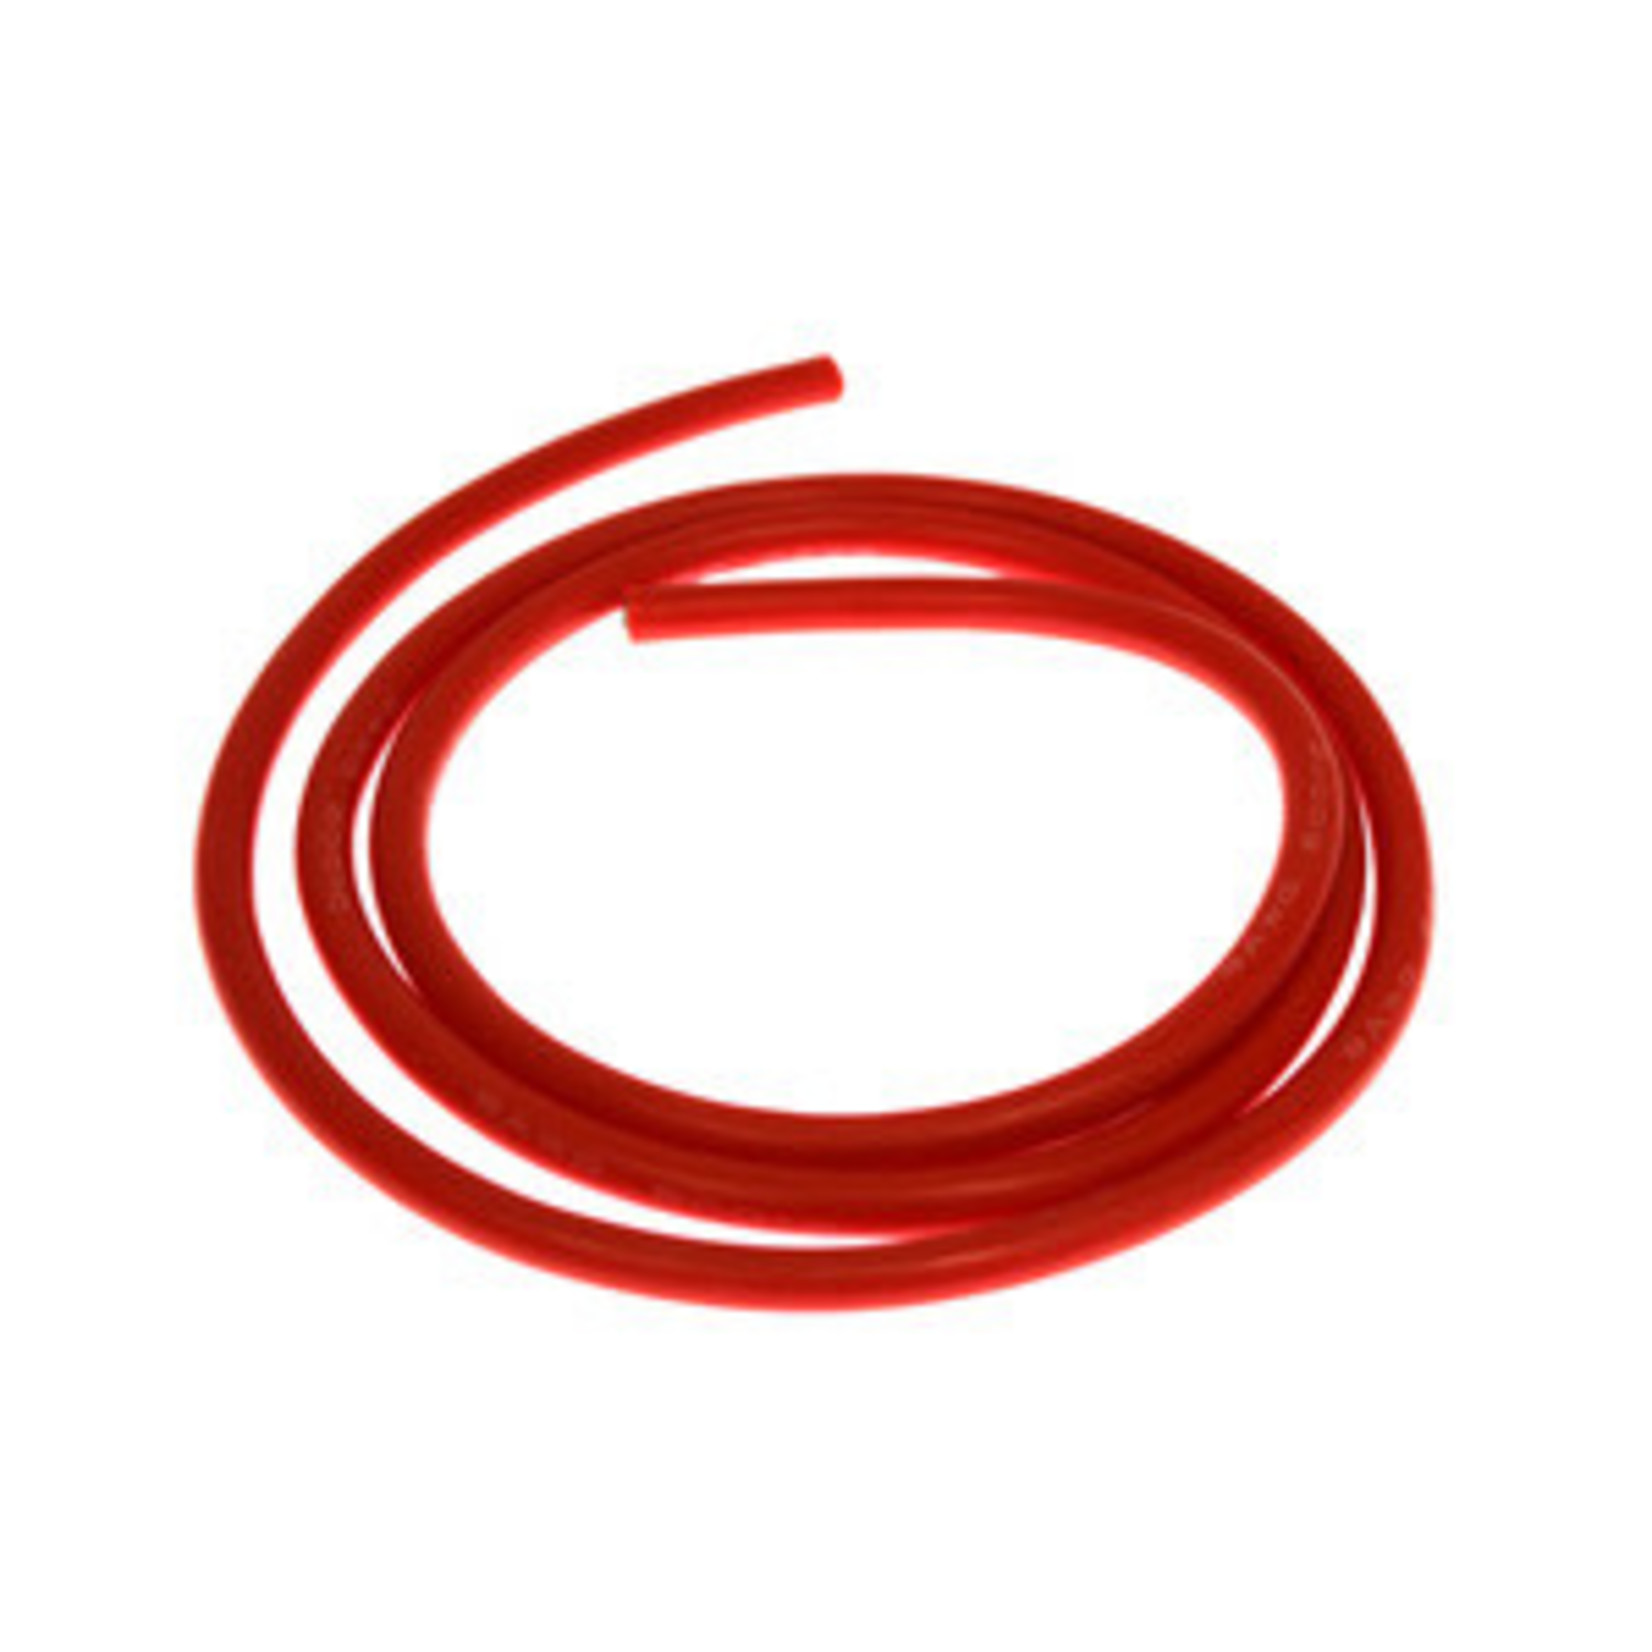 Racers Edge RCE1211  8 Gauge Silicone Wire, 3' Red